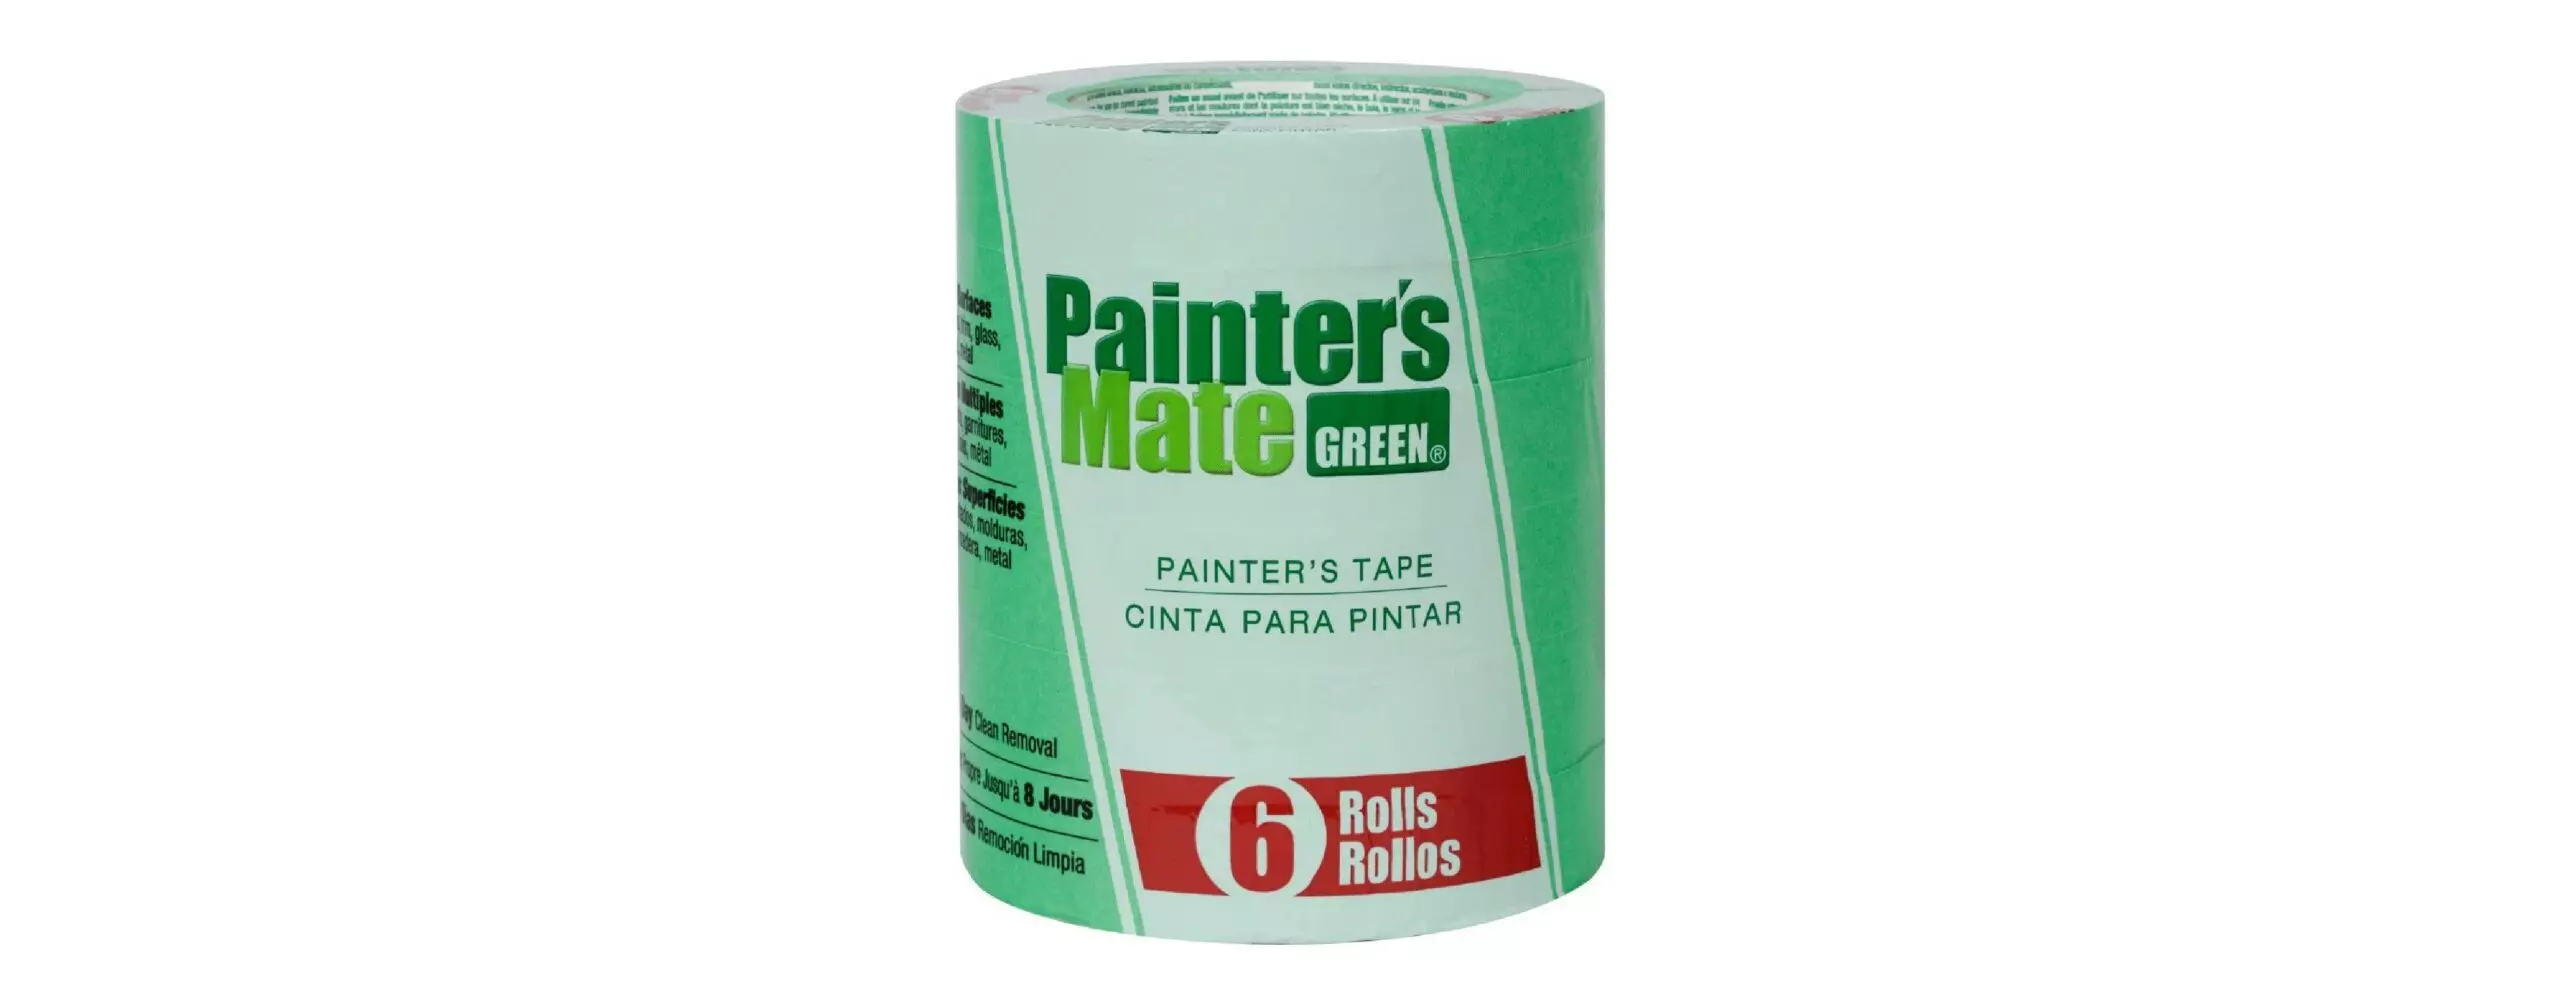 Painter's Mate Green Painting Tape